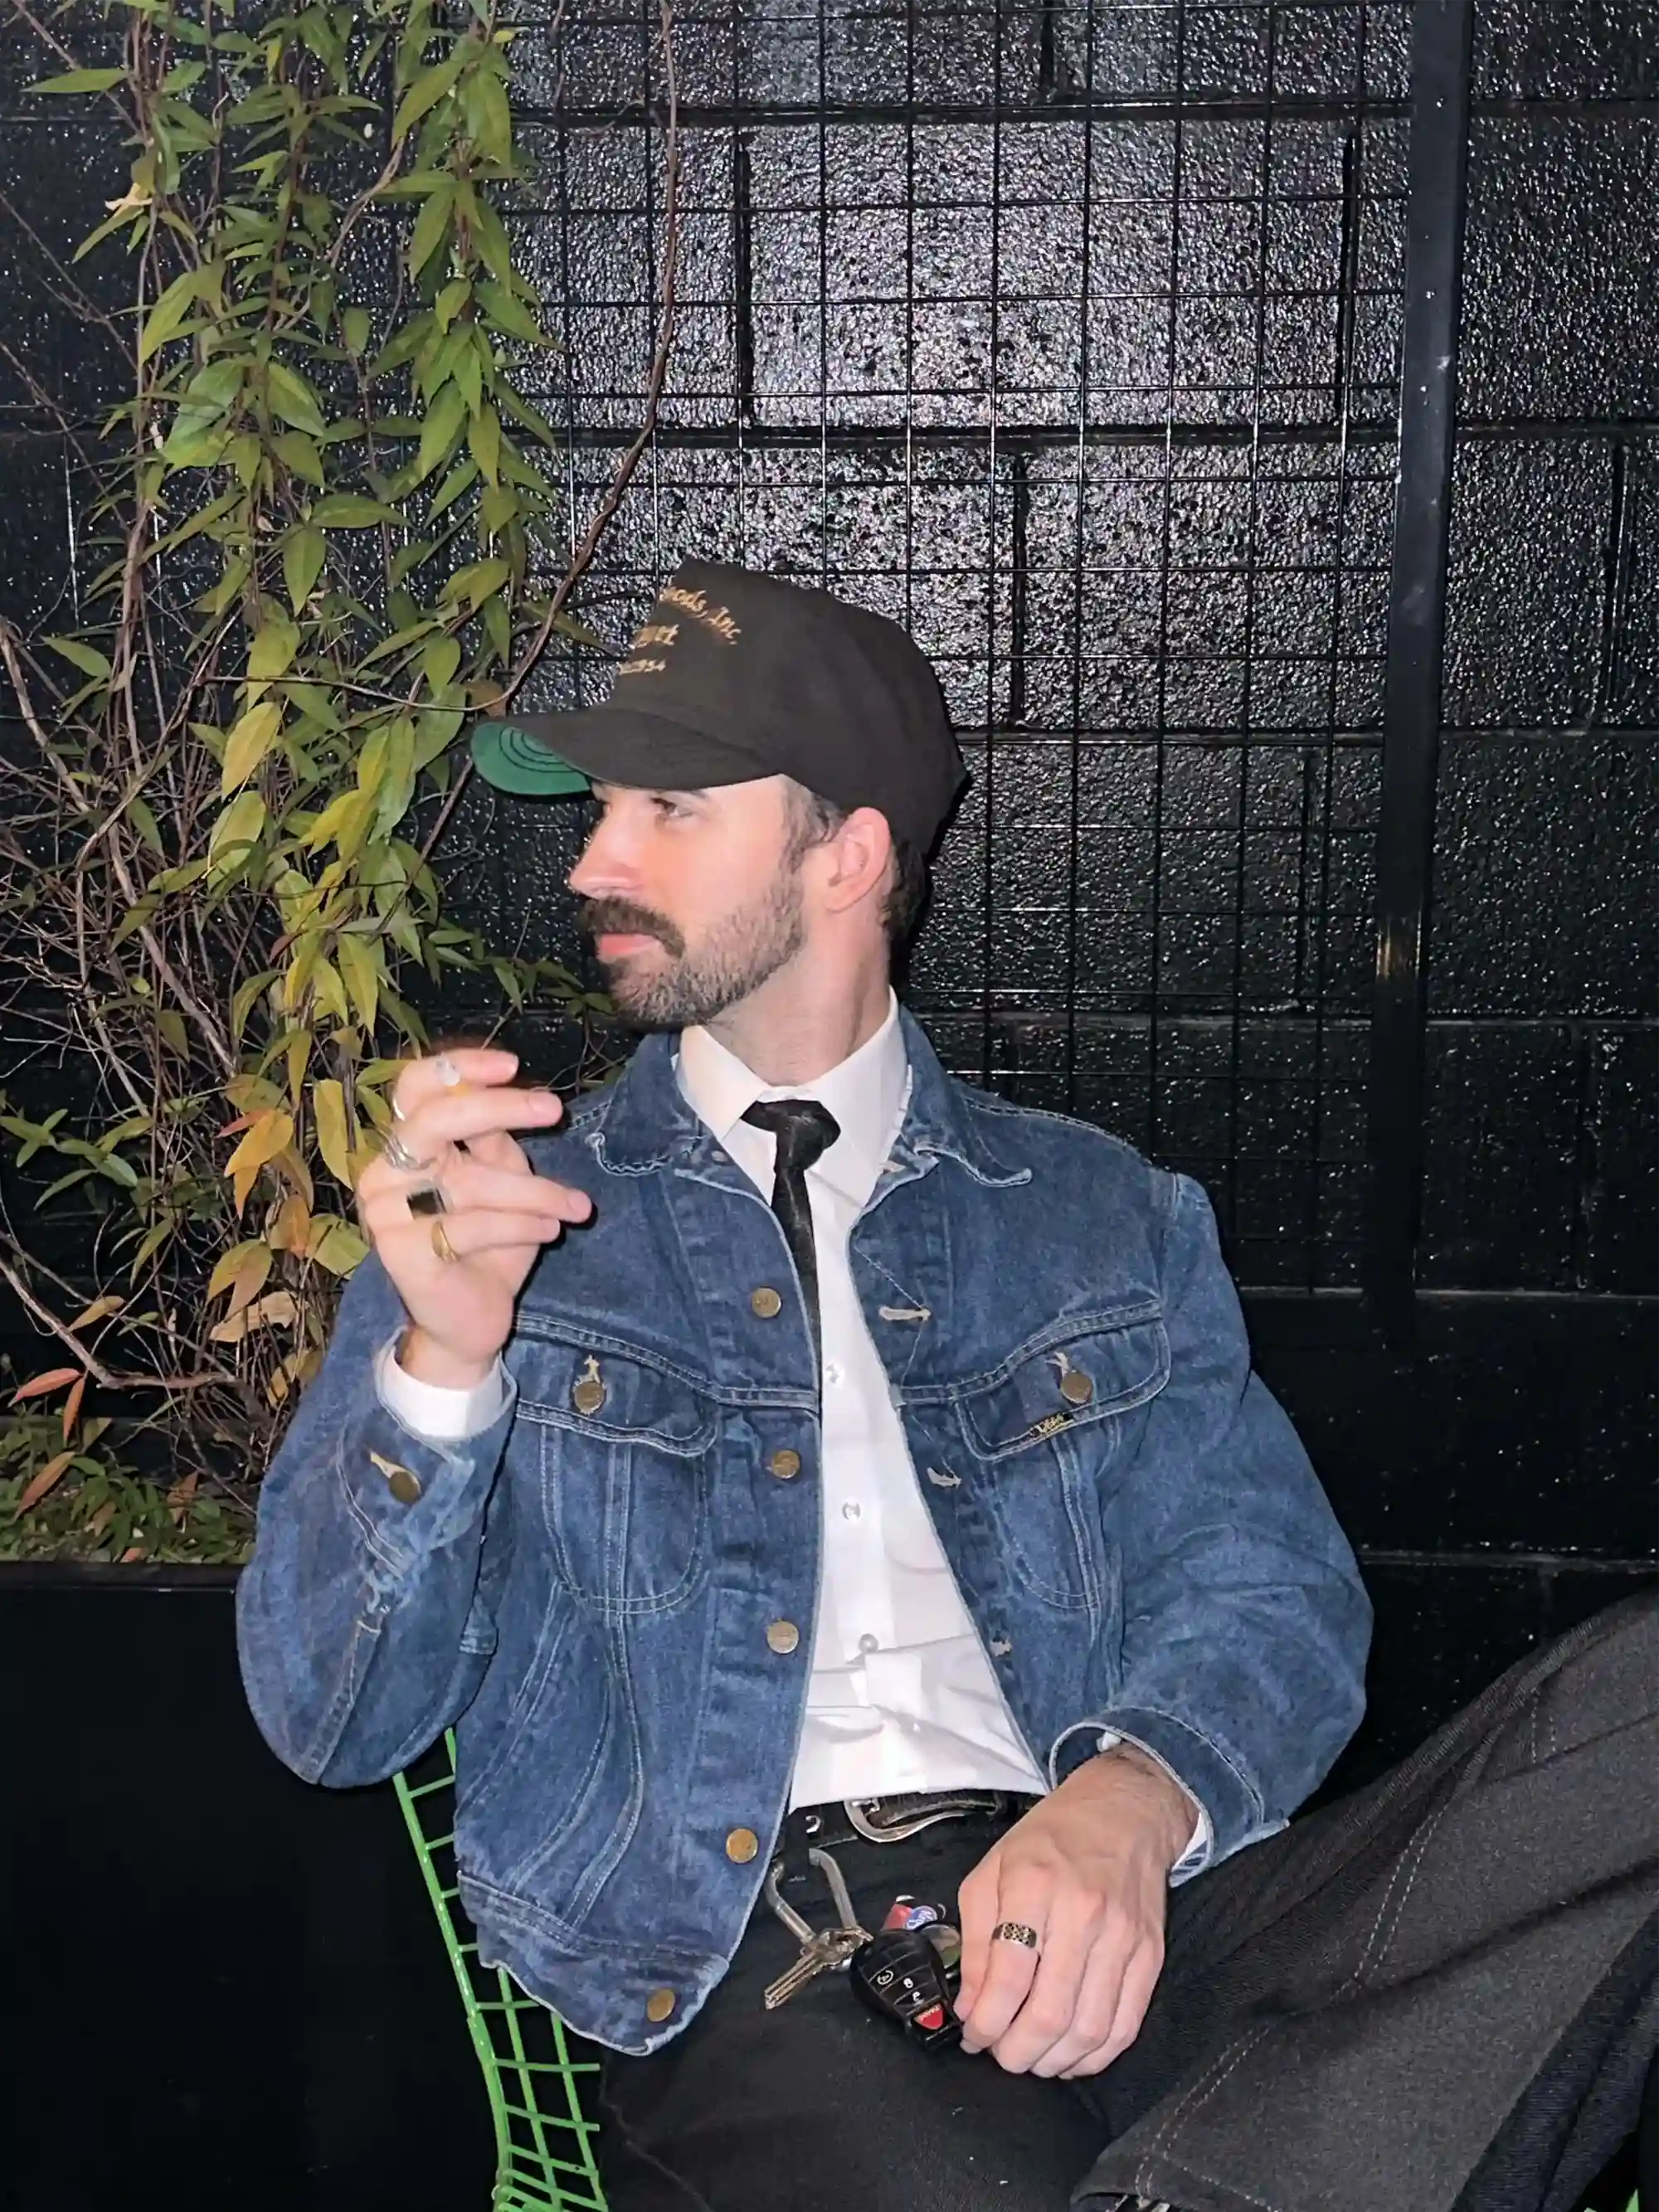 Find this outfit: Man smoking a cigarette in a denim coat, black ball cap, and a silver ring.